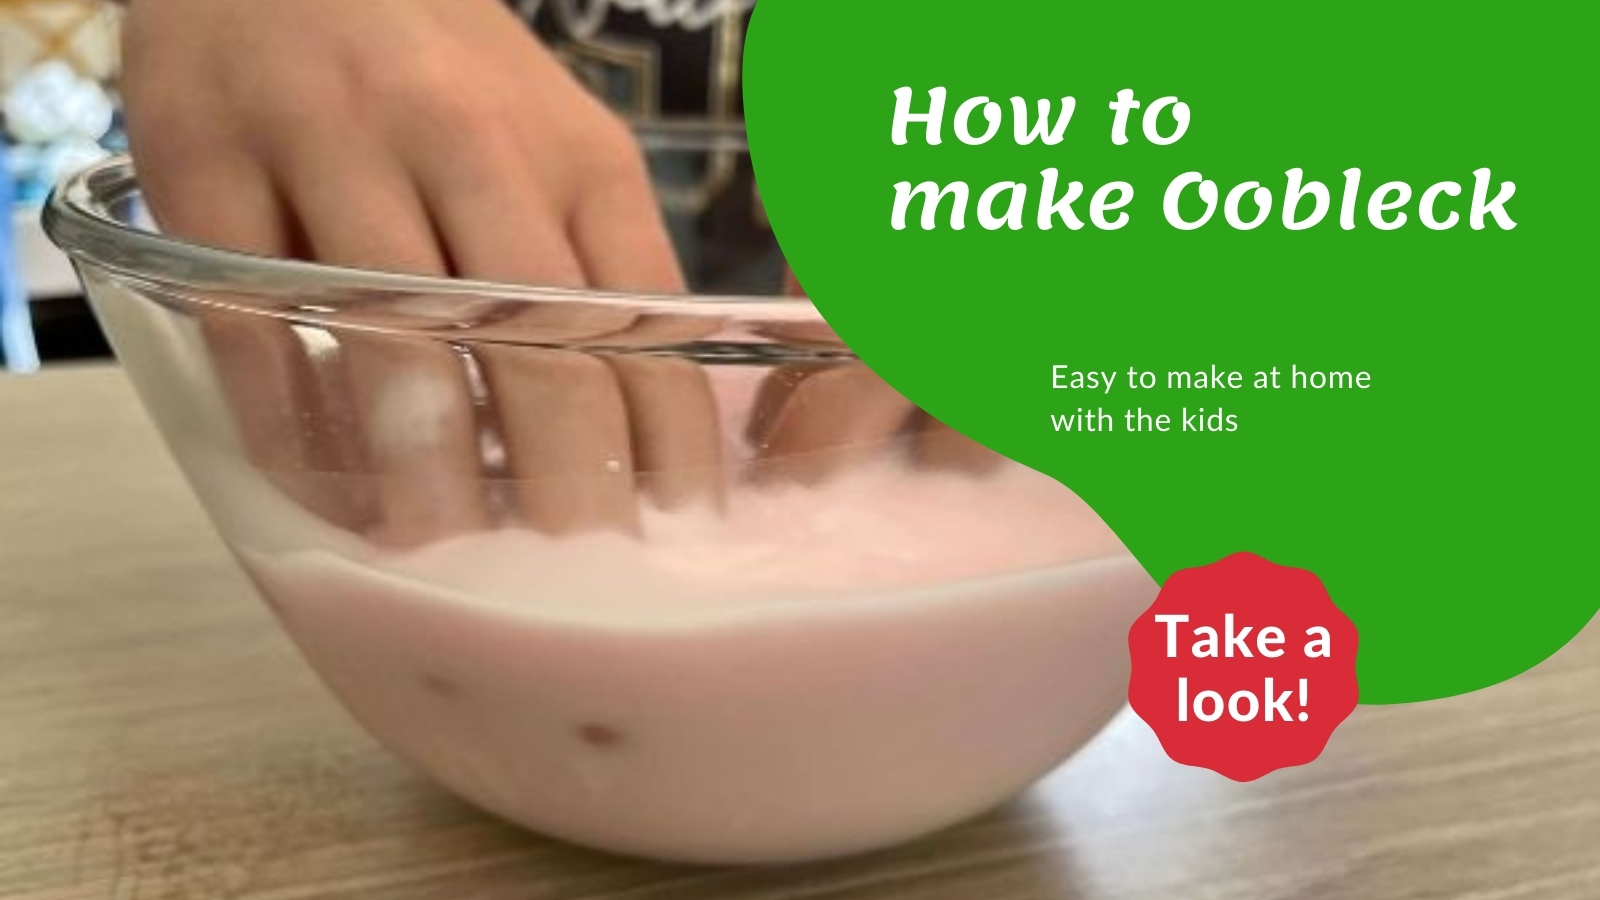 Oobleck recipe: How to make it at home